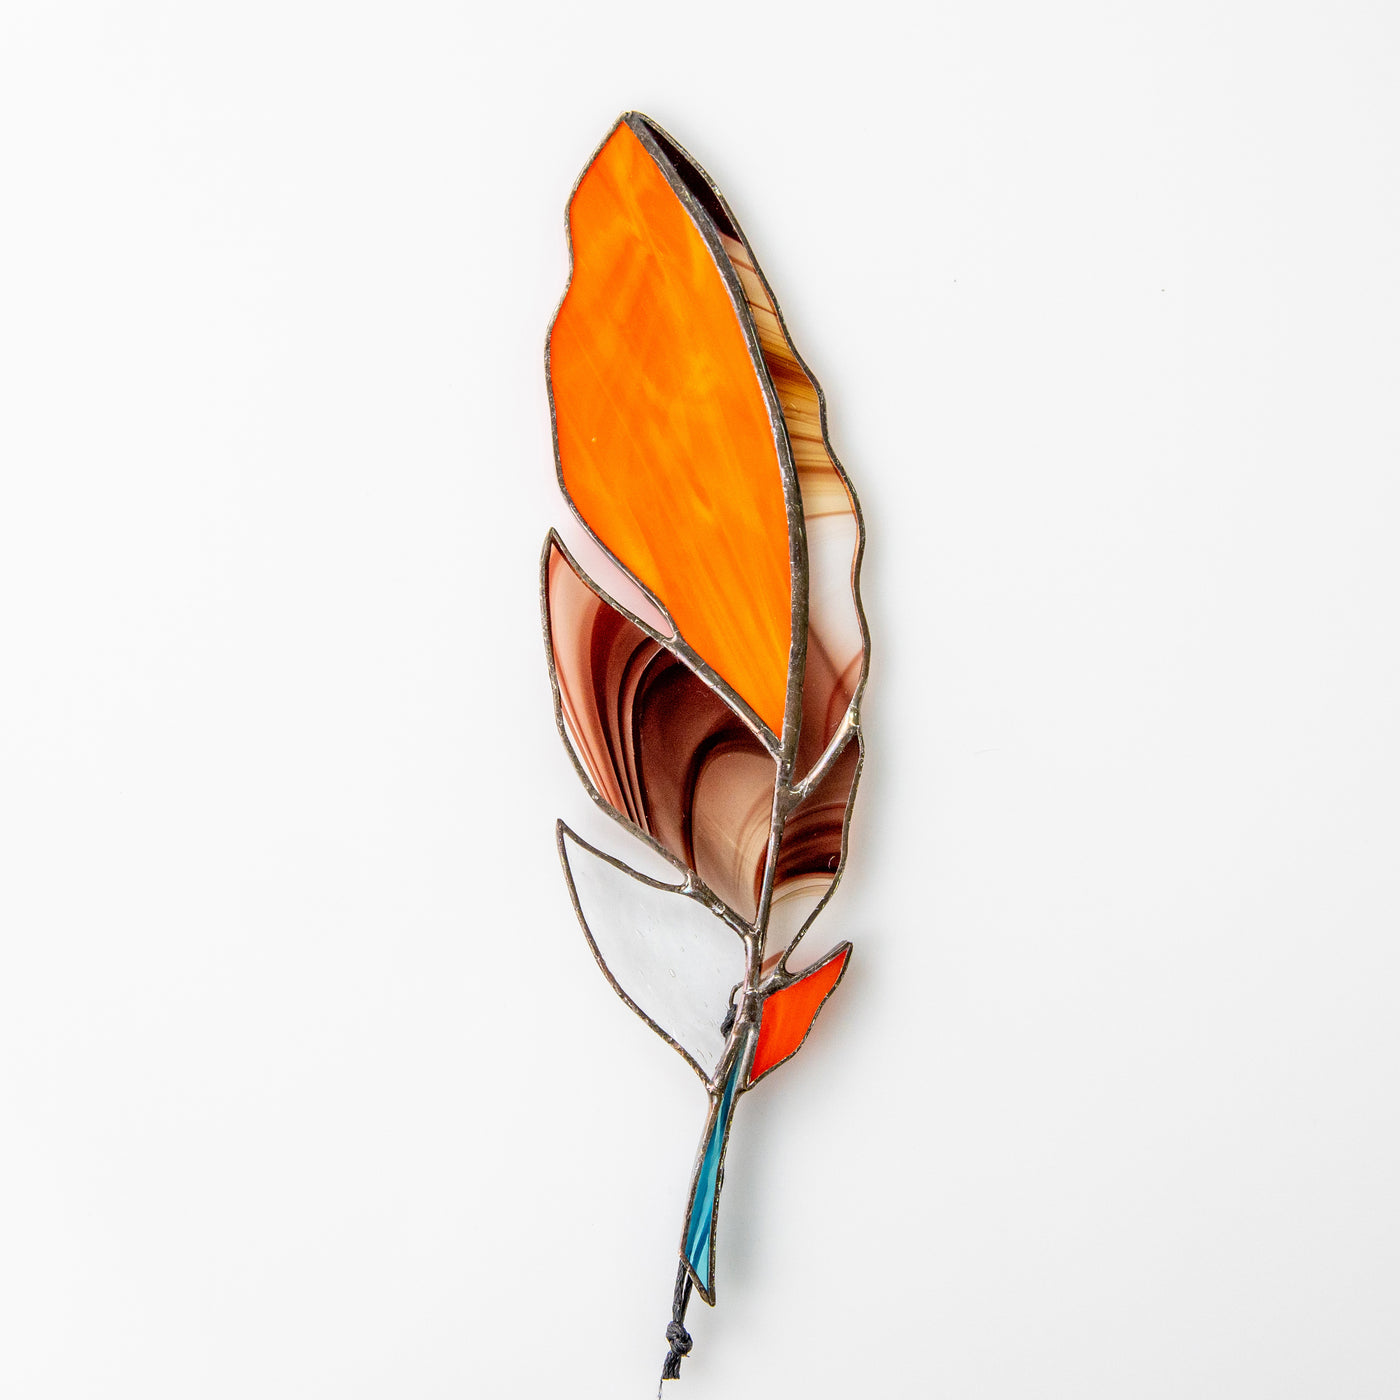 Stained glass orange feather suncatcher with bardic blotchiness